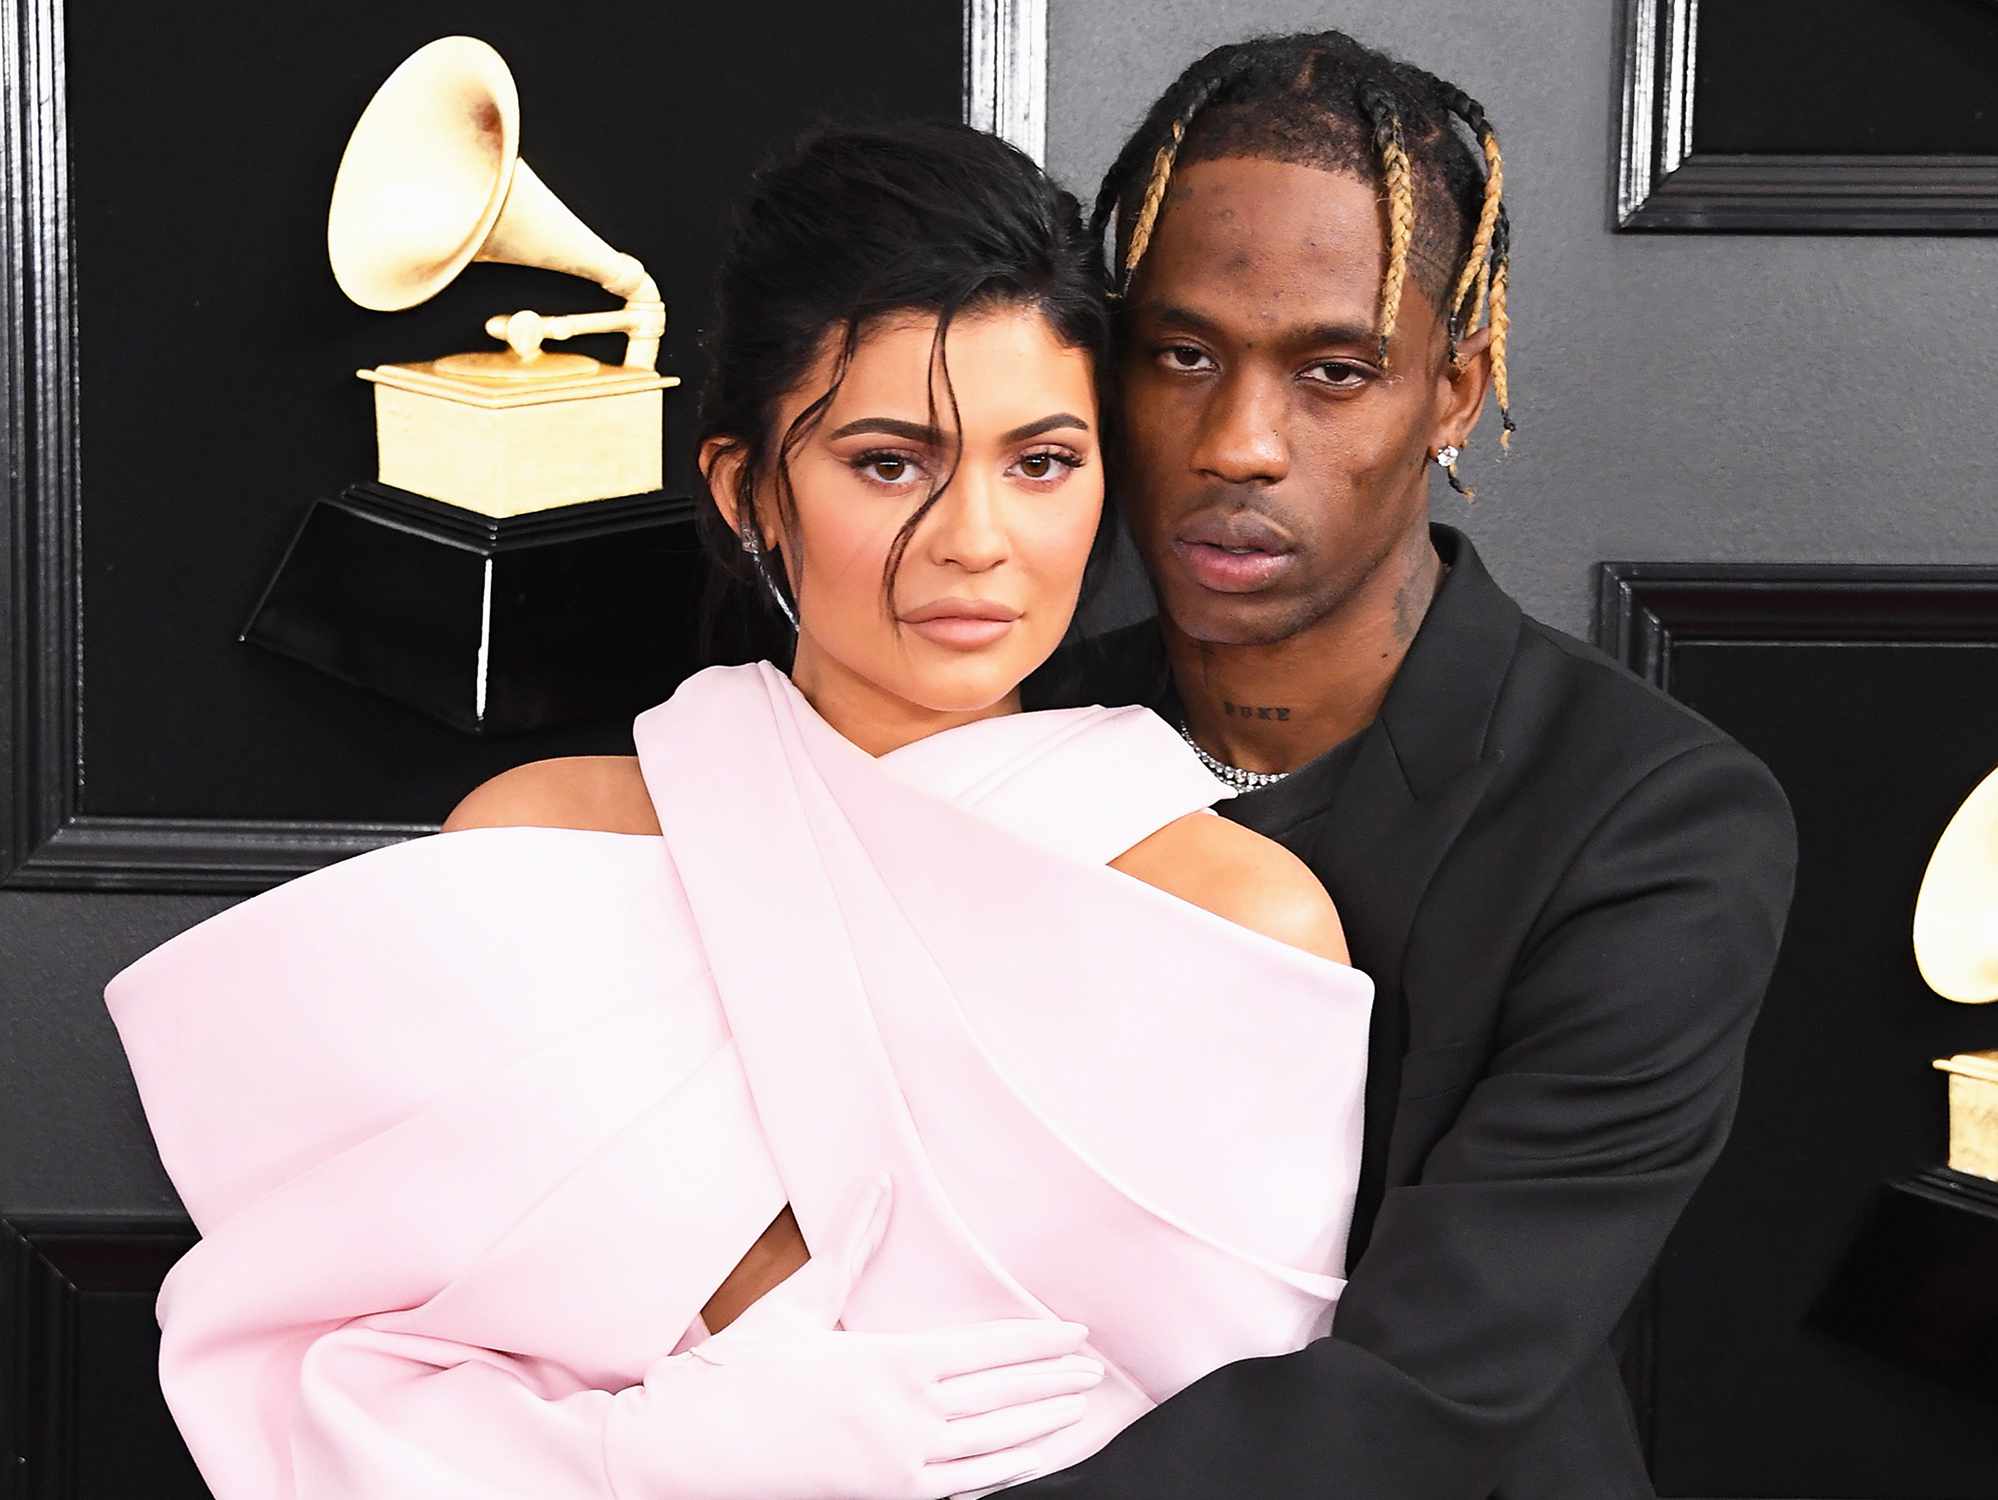 Travis Scott (L) and Kylie Jenner attend the 61st Annual GRAMMY Awards at Staples Center on February 10, 2019 in Los Angeles, California.